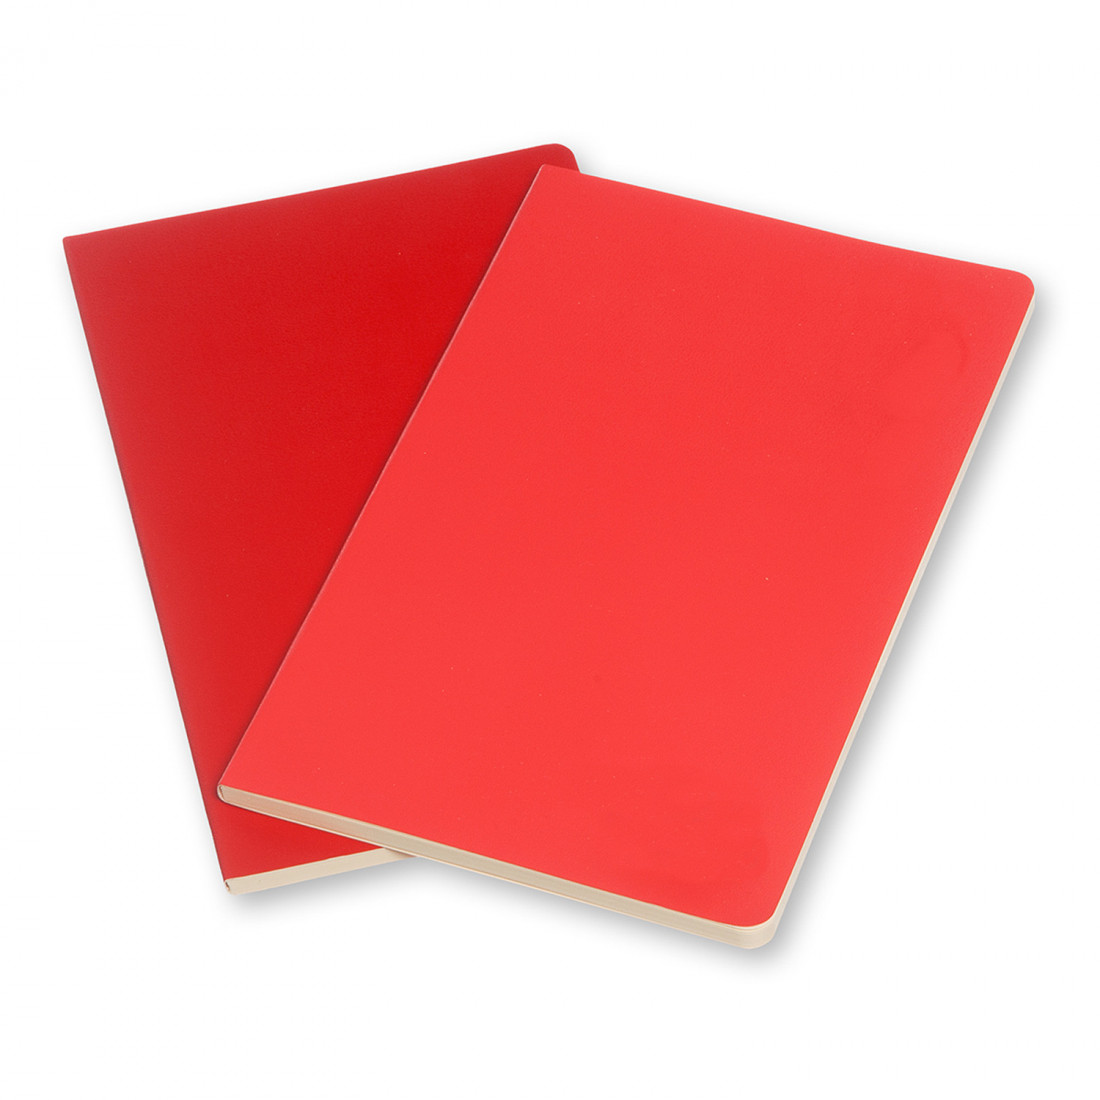 Set of 2 Plain Journals Voland Red Soft Cover Large 13x21 Moleskine